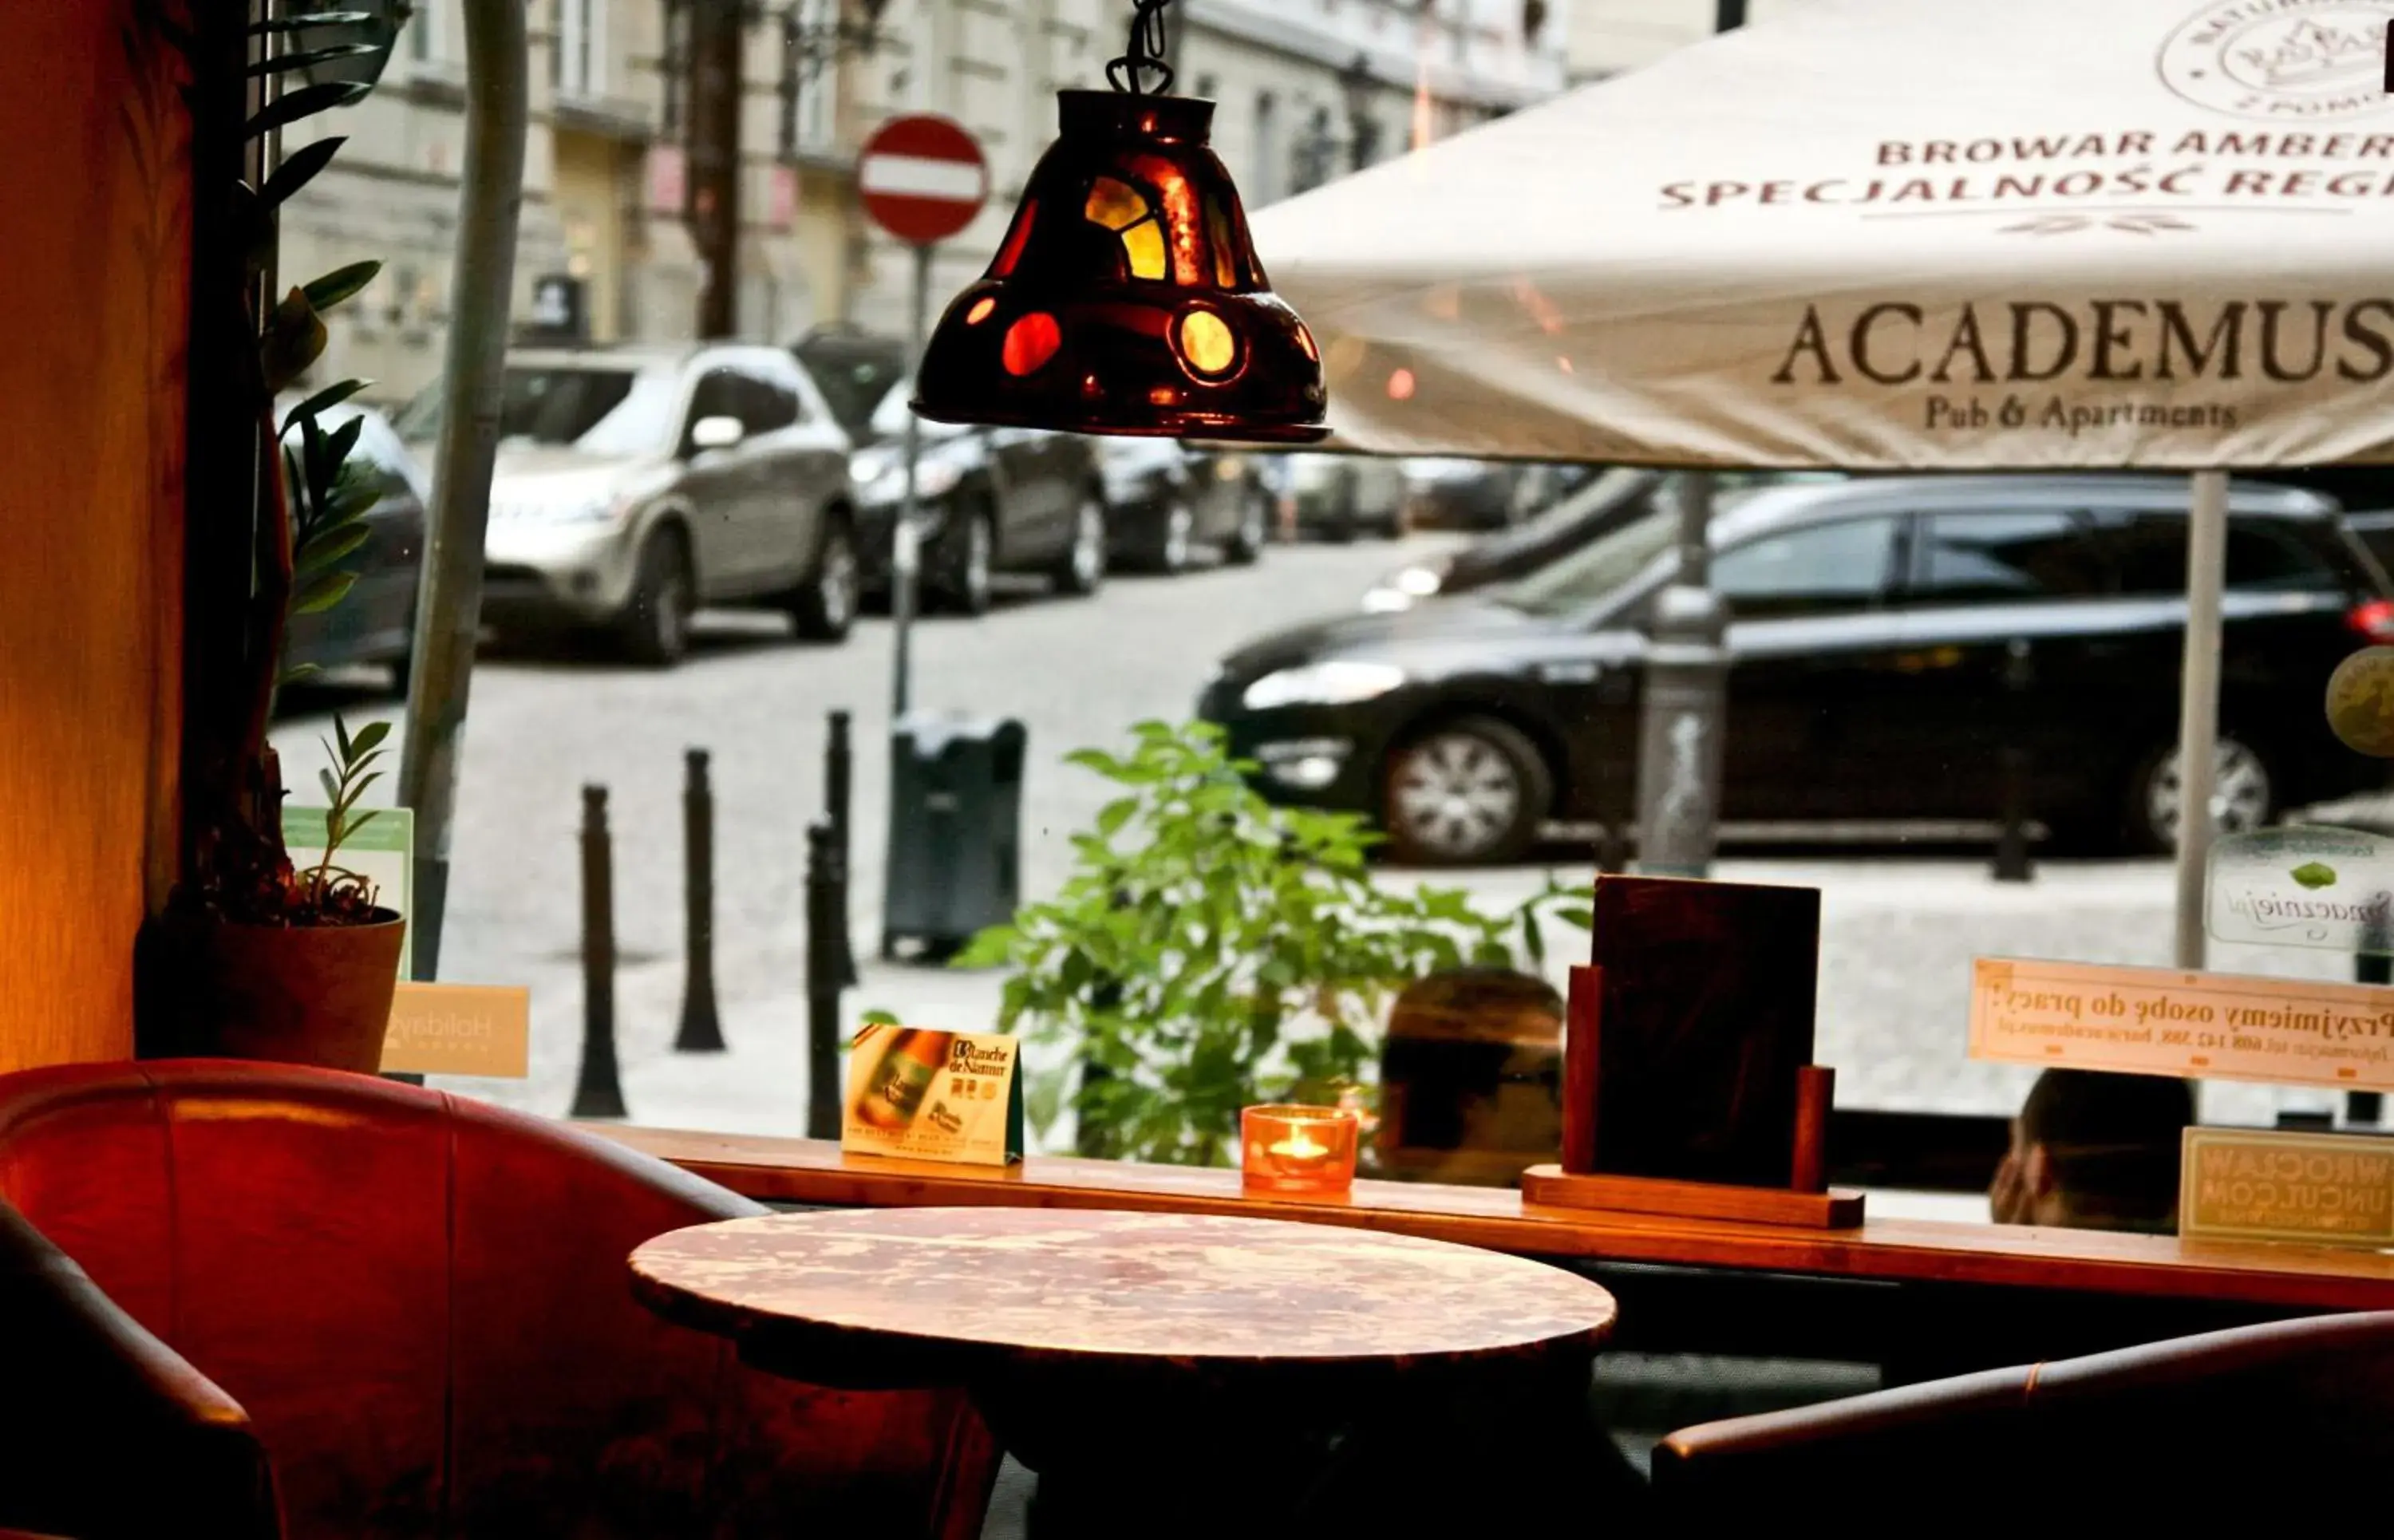 Restaurant/places to eat in Academus - Cafe/Pub & Guest House